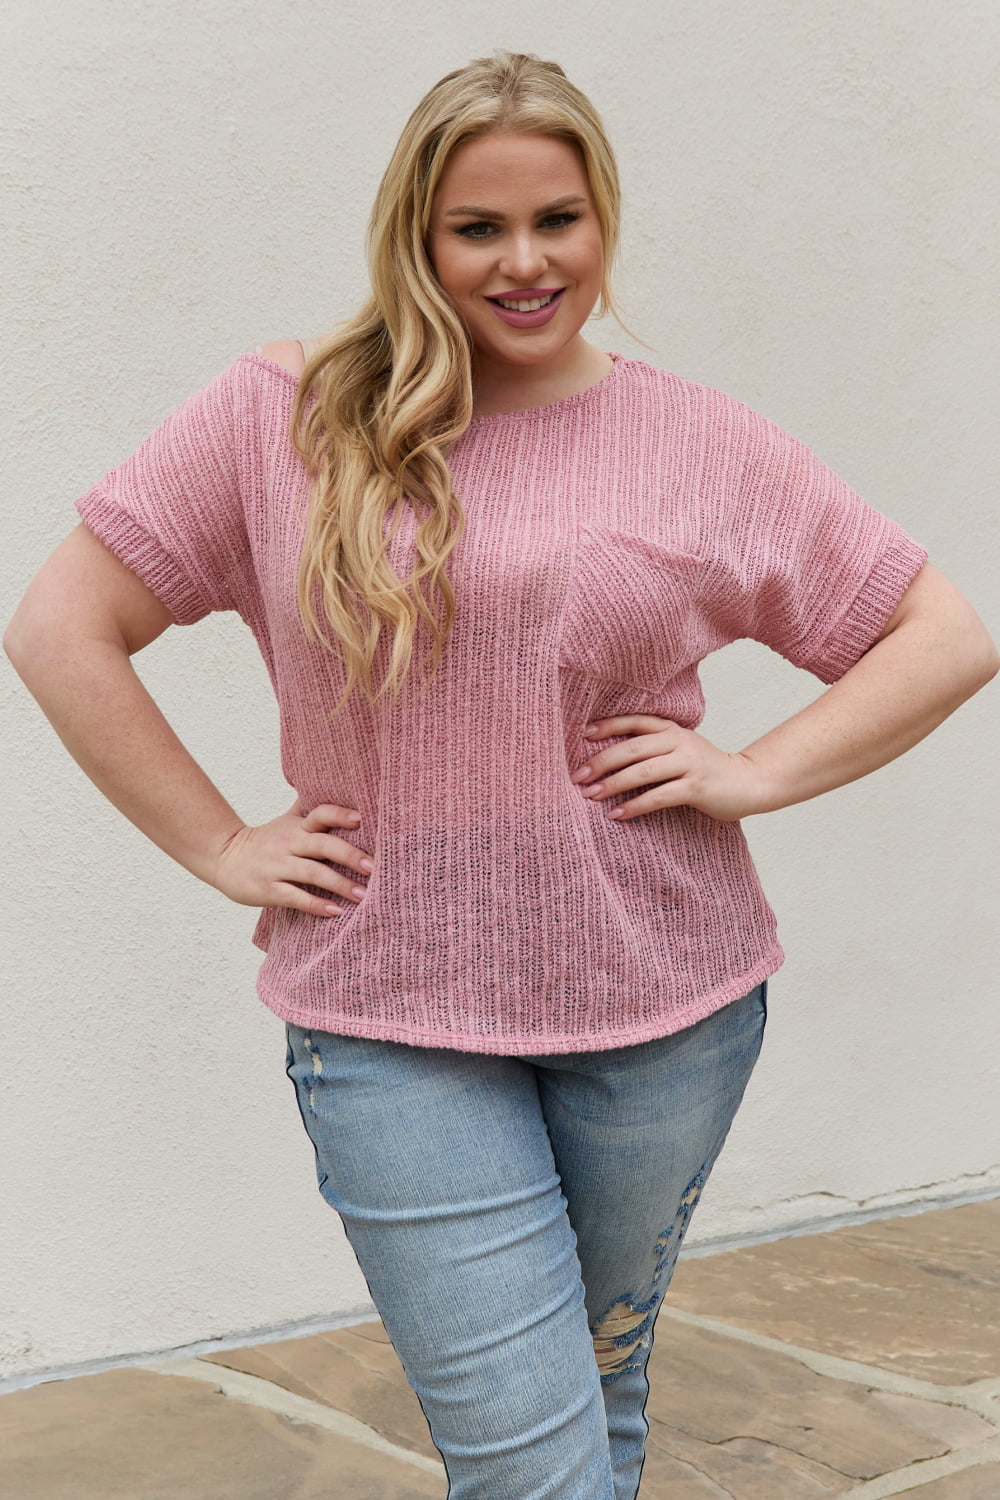 e.Luna Chunky Knit Short Sleeve Top in Mauve - Online Only